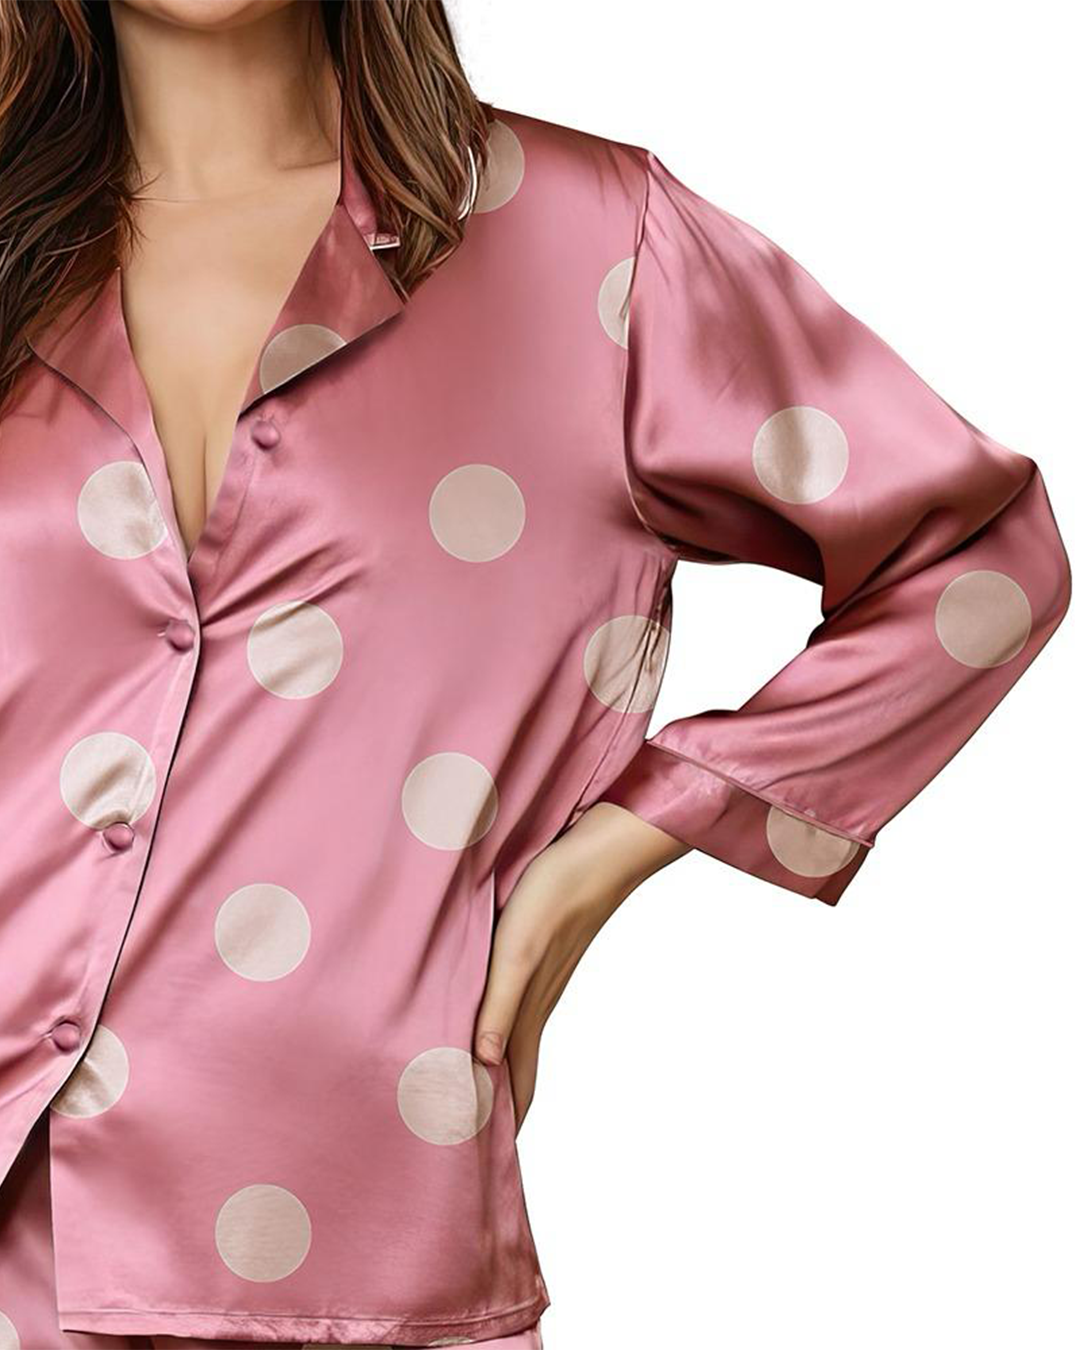 Women's pajamas with buttons by Stan Dwyer